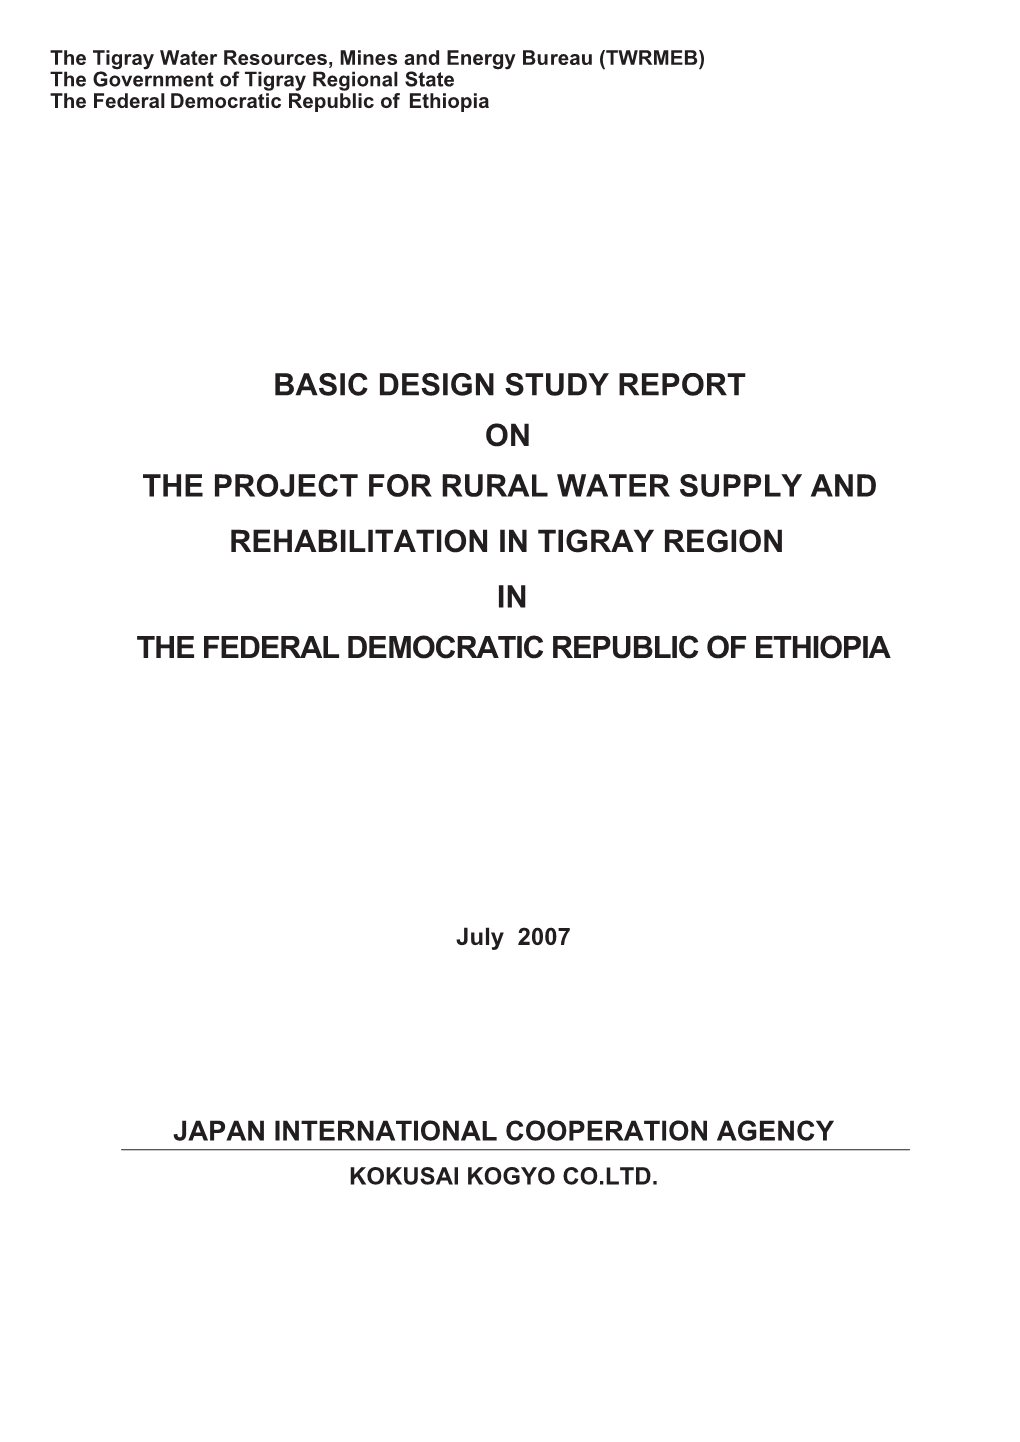 Basic Design Study Report on the Project for Rural Water Supply and Rehabilitation in Tigray Region in the Federal Democratic Republic of Ethiopia